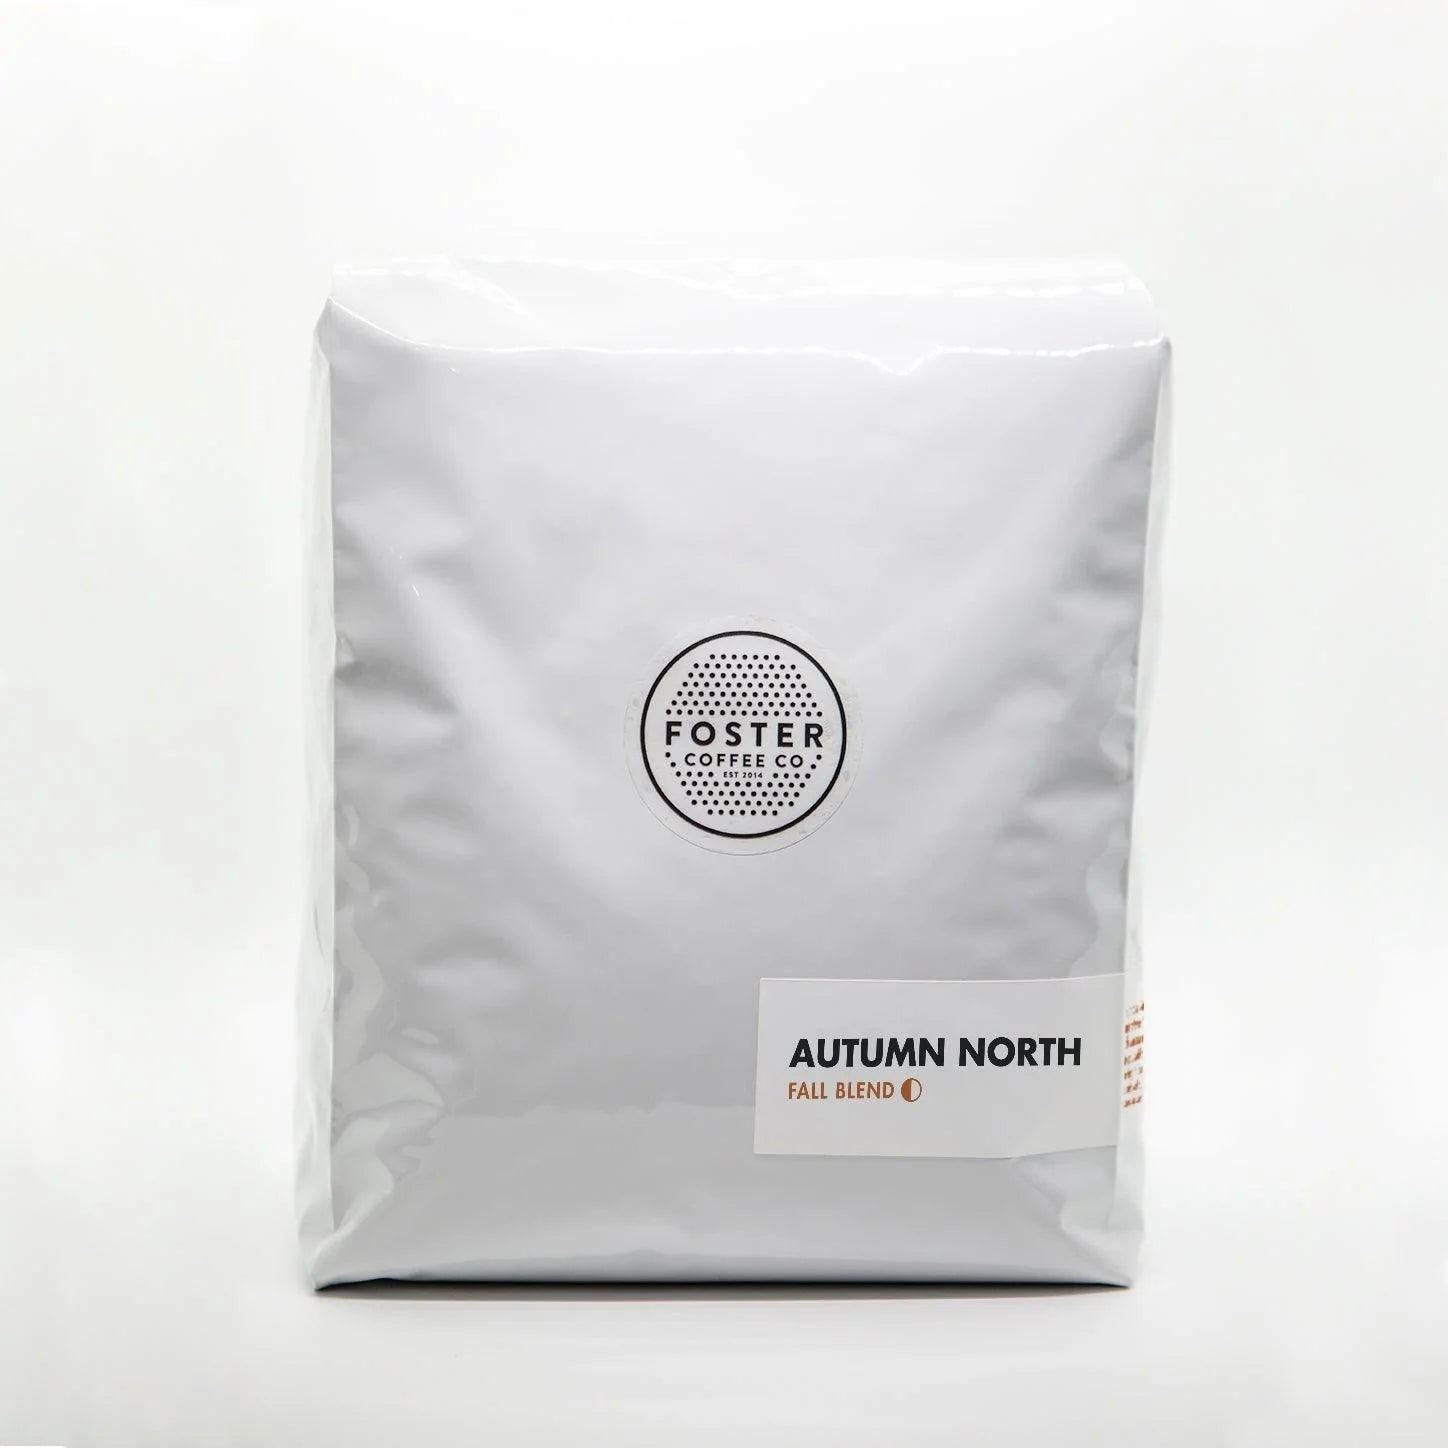 Autumn North (Fall Blend) - Wholesale - Foster Coffee